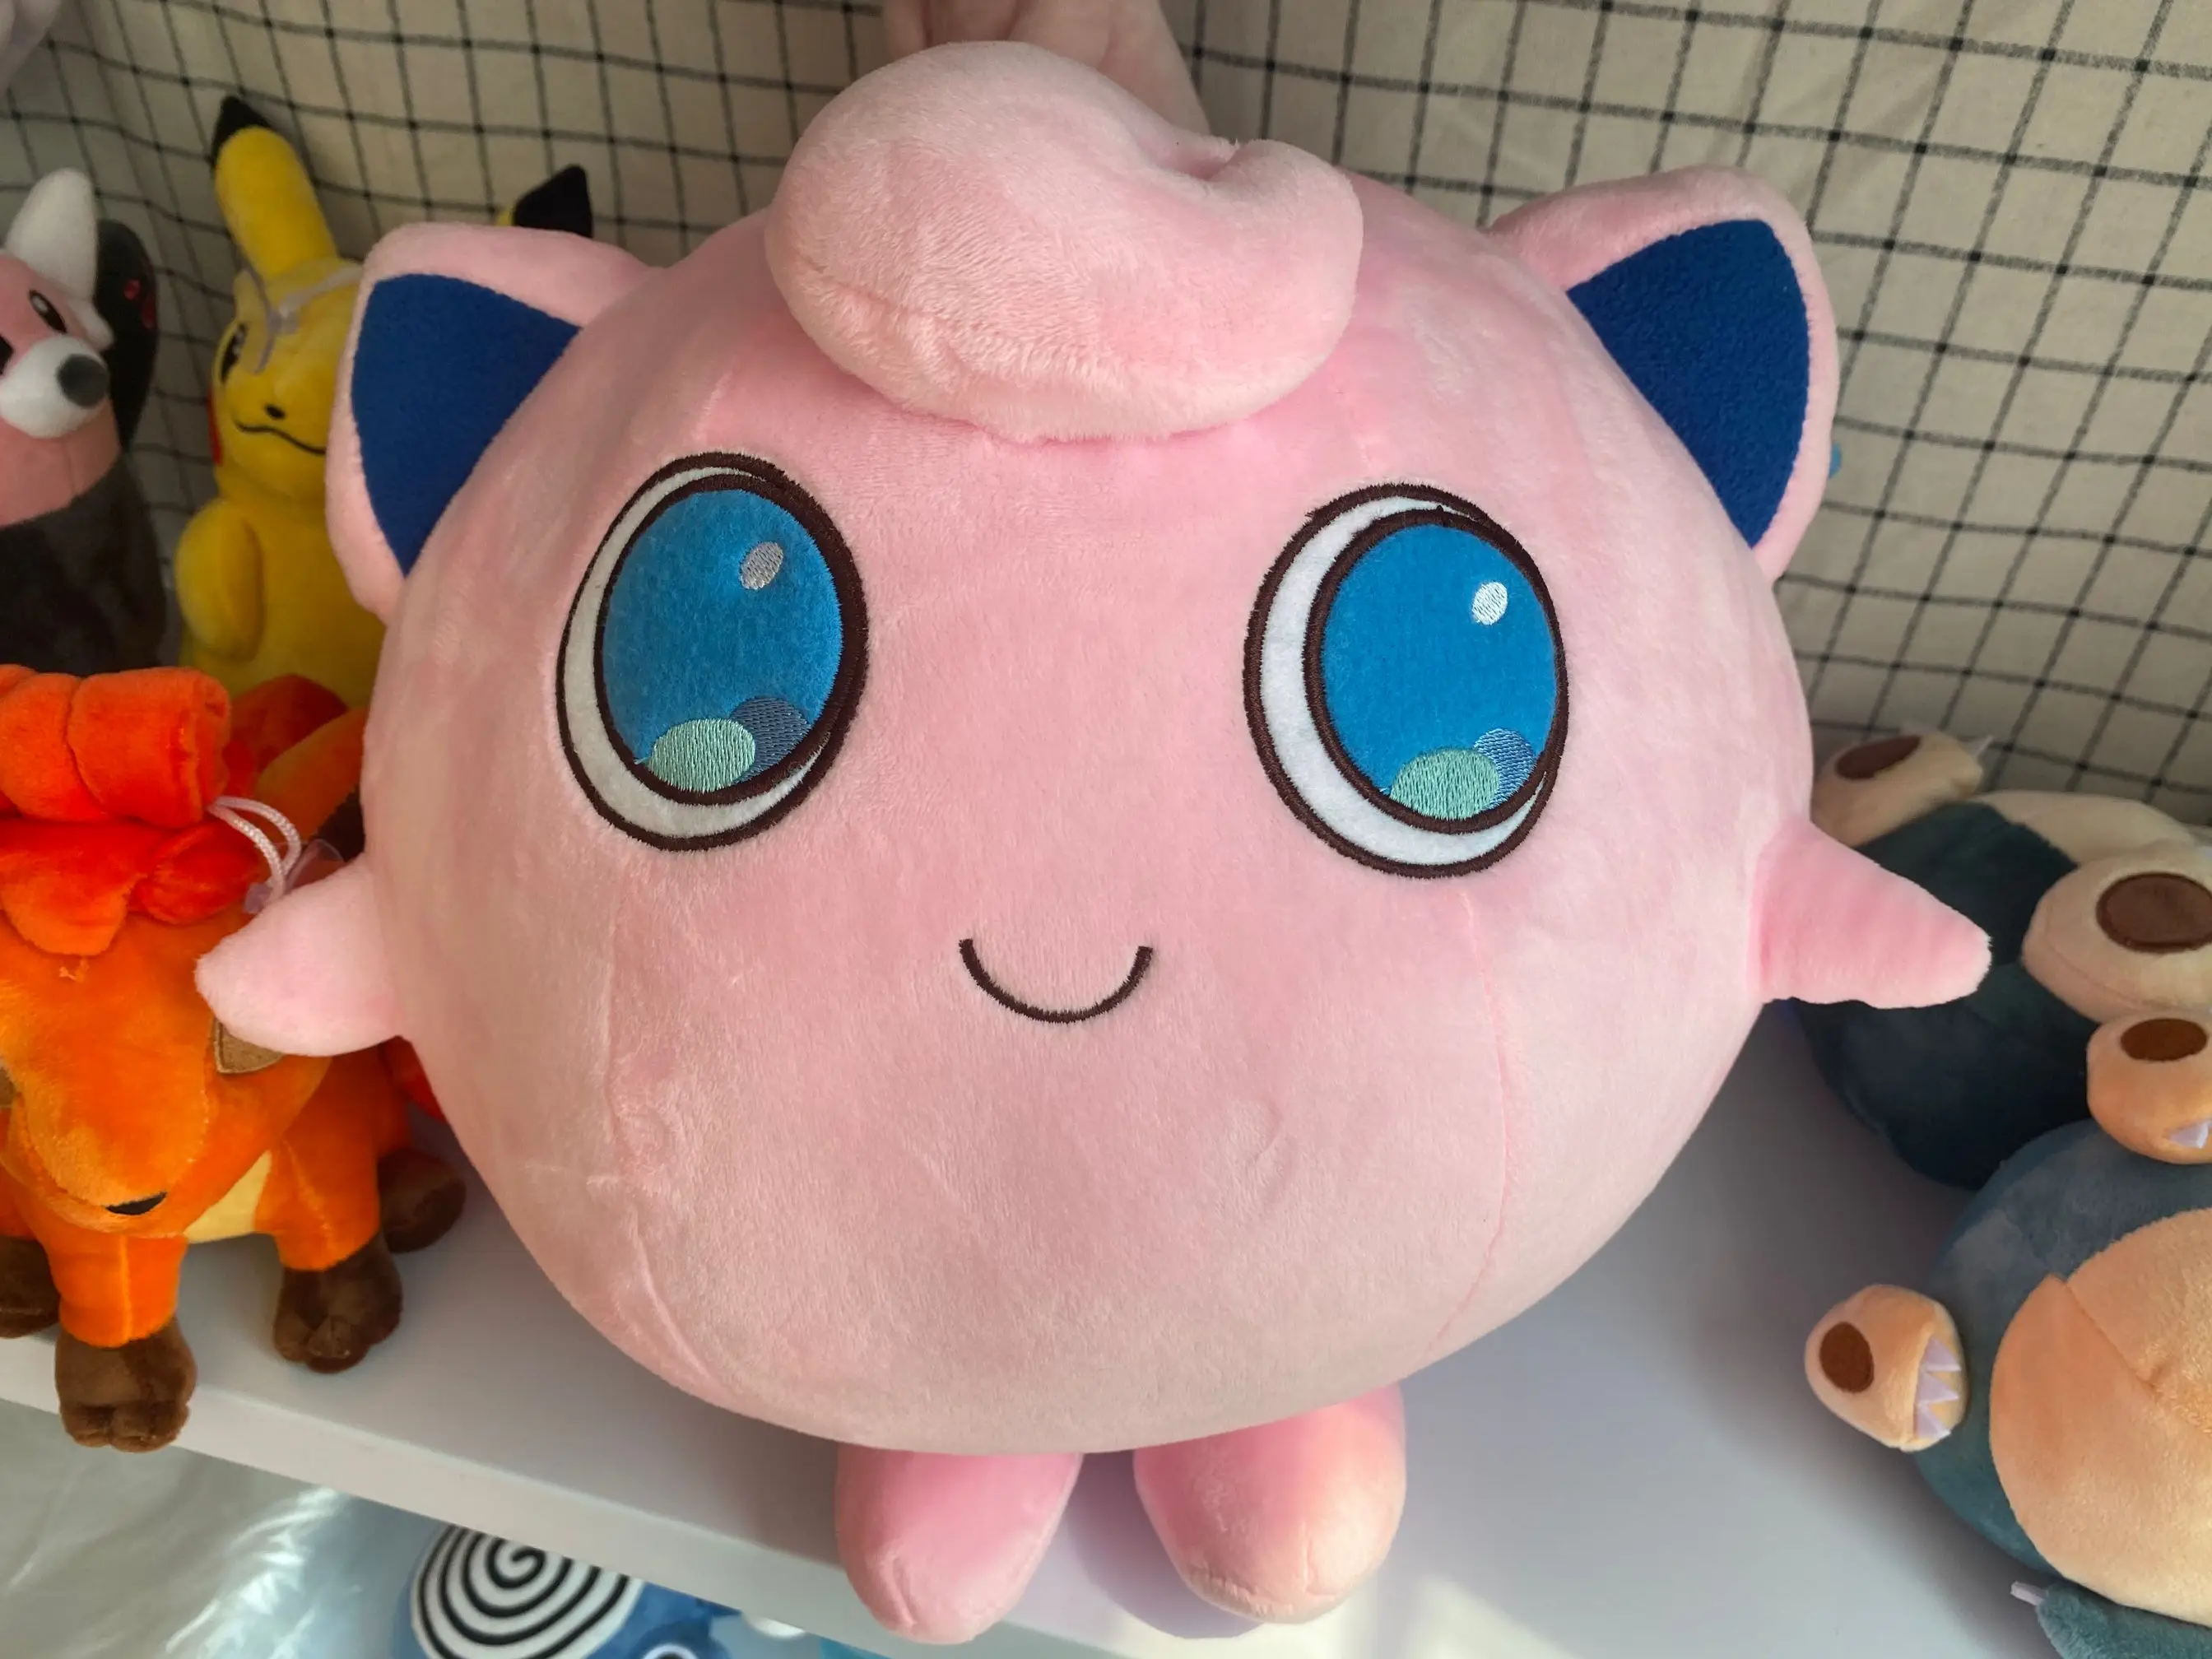 Details about   *FREE SHIP SPECIAL* Pokemon Plush JIGGLYPUFF 5" FUZZY TOMY Doll Figure Toy Japan 